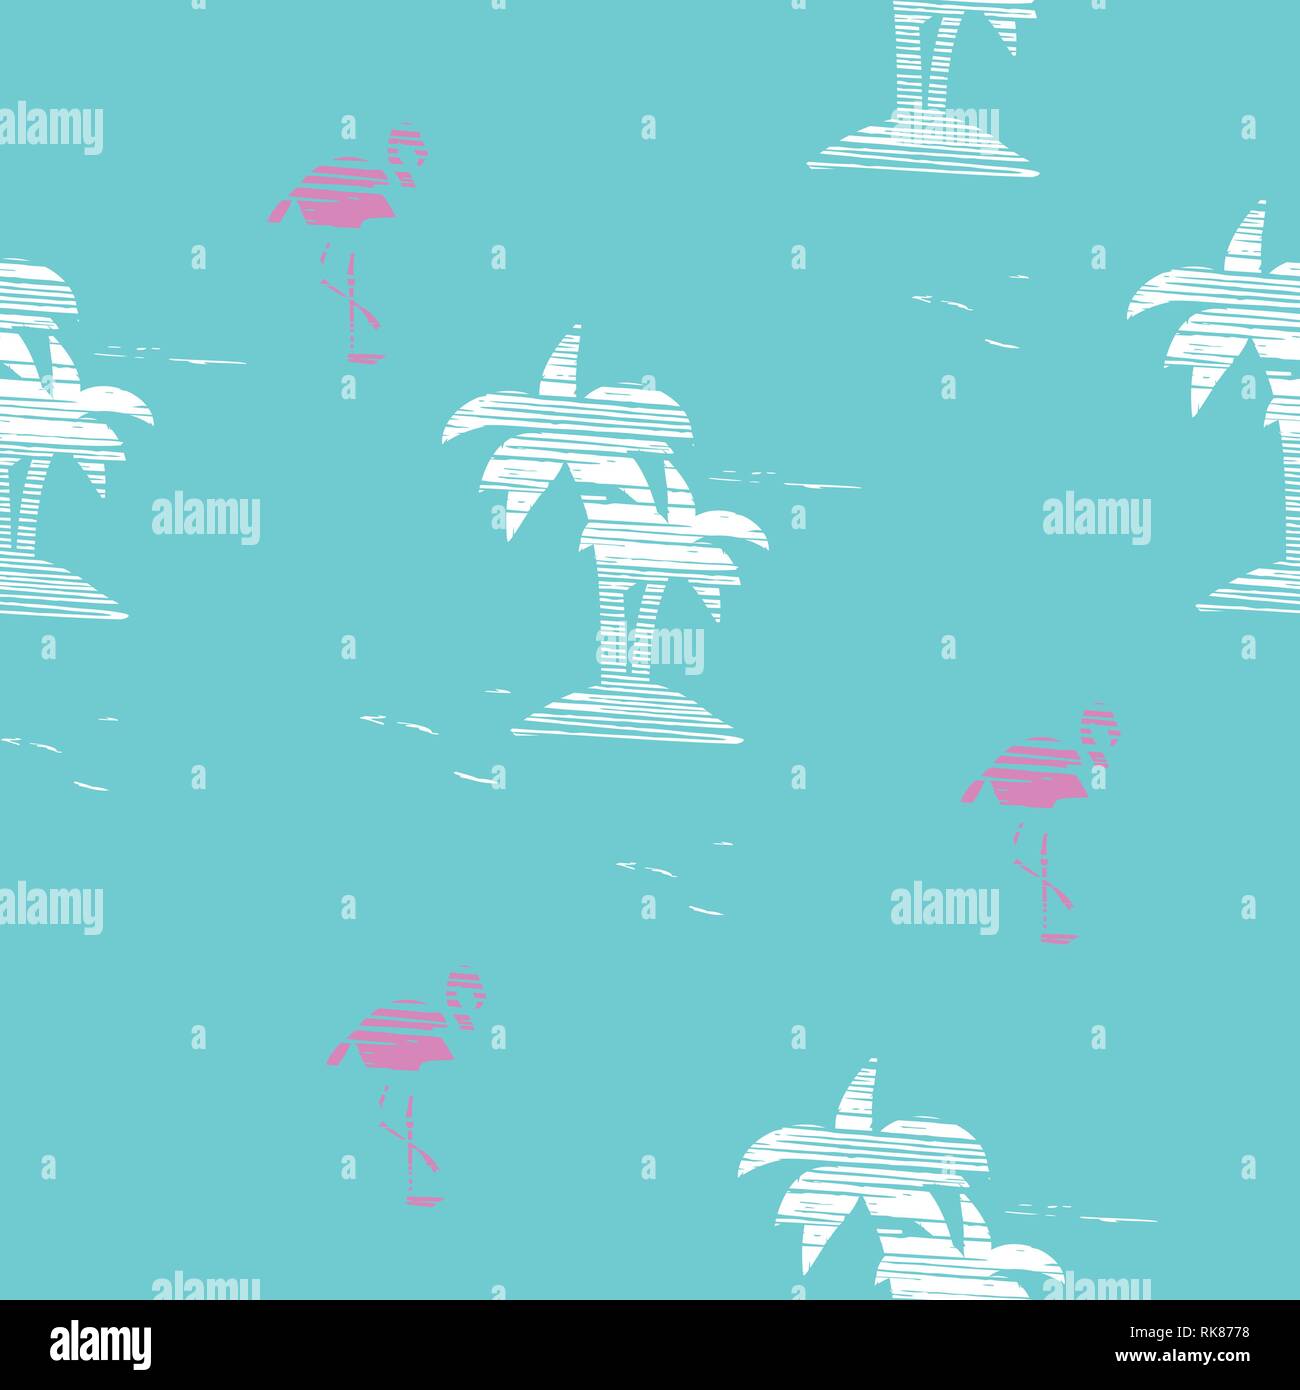 Vintage Beautiful seamless island pattern Landscape with palm trees, flamingo and ocean vector hand drawn style on blue color background. Stock Vector